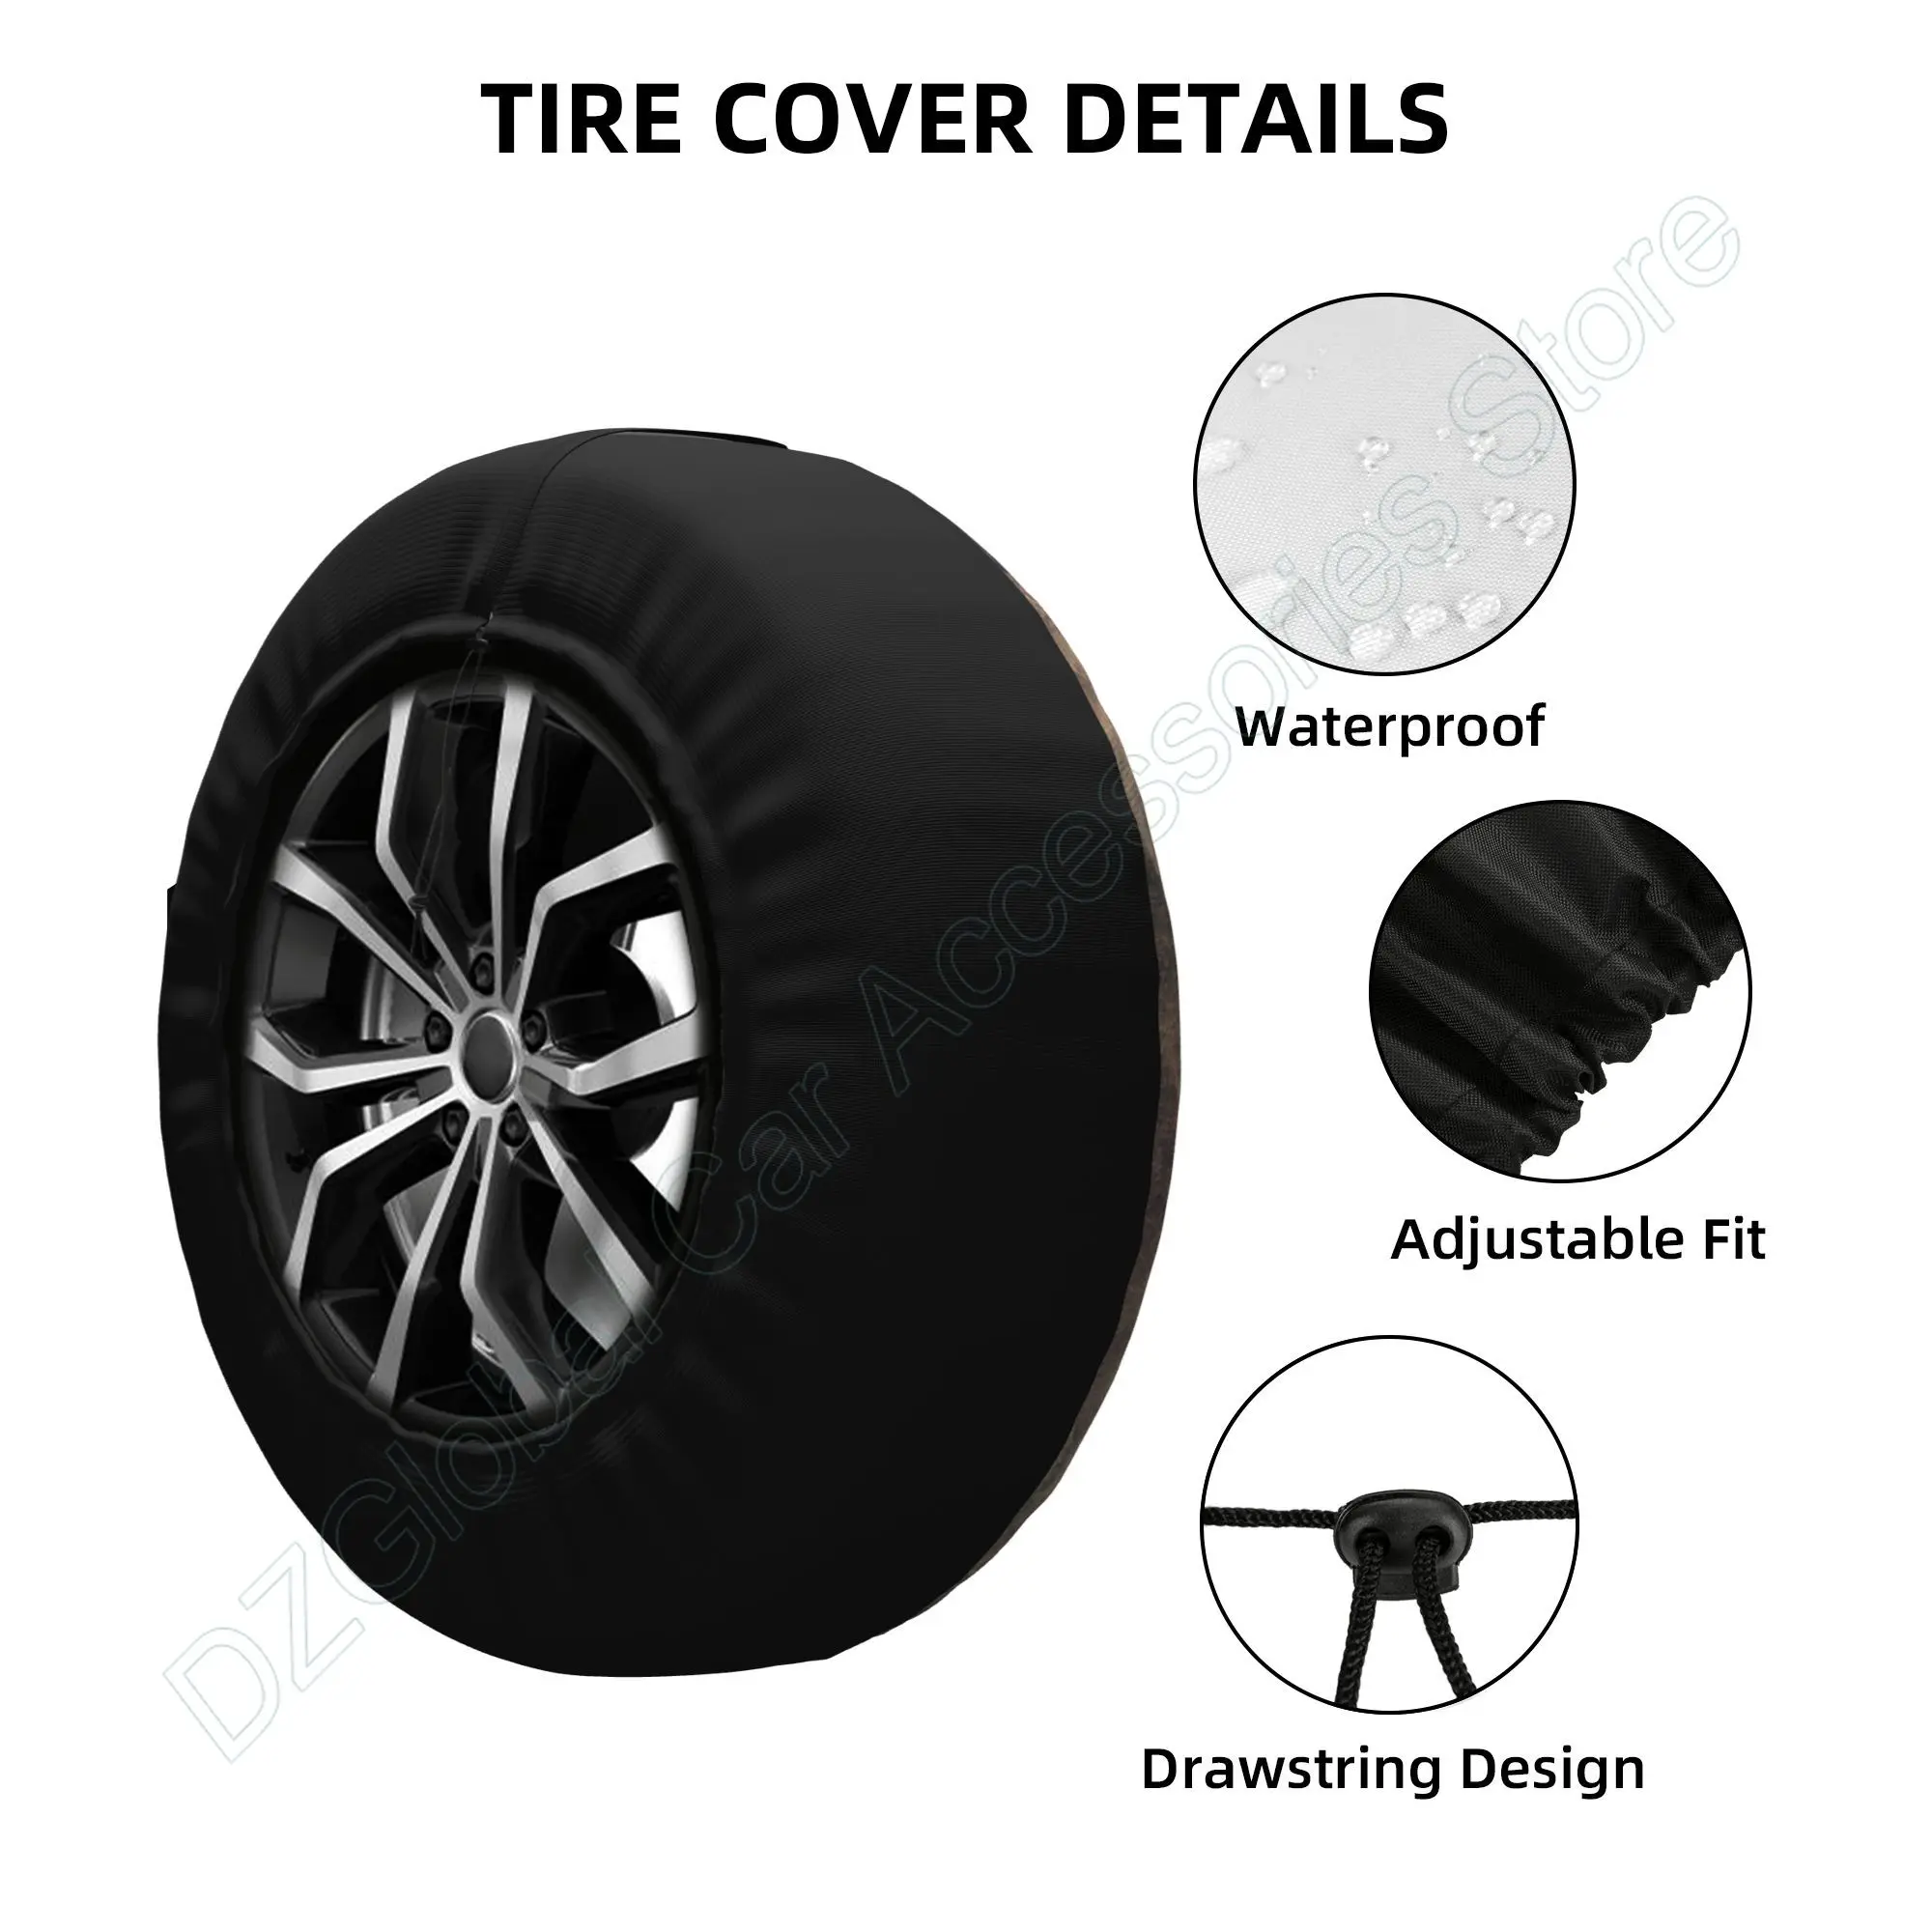 Horse Spare Tire CoverPalm Tree Summer Blue Sky Tire Cover Wheel Protectors  for Cars Trailer RV SUV Camper Truck14 15 16 17 Inch AliExpress